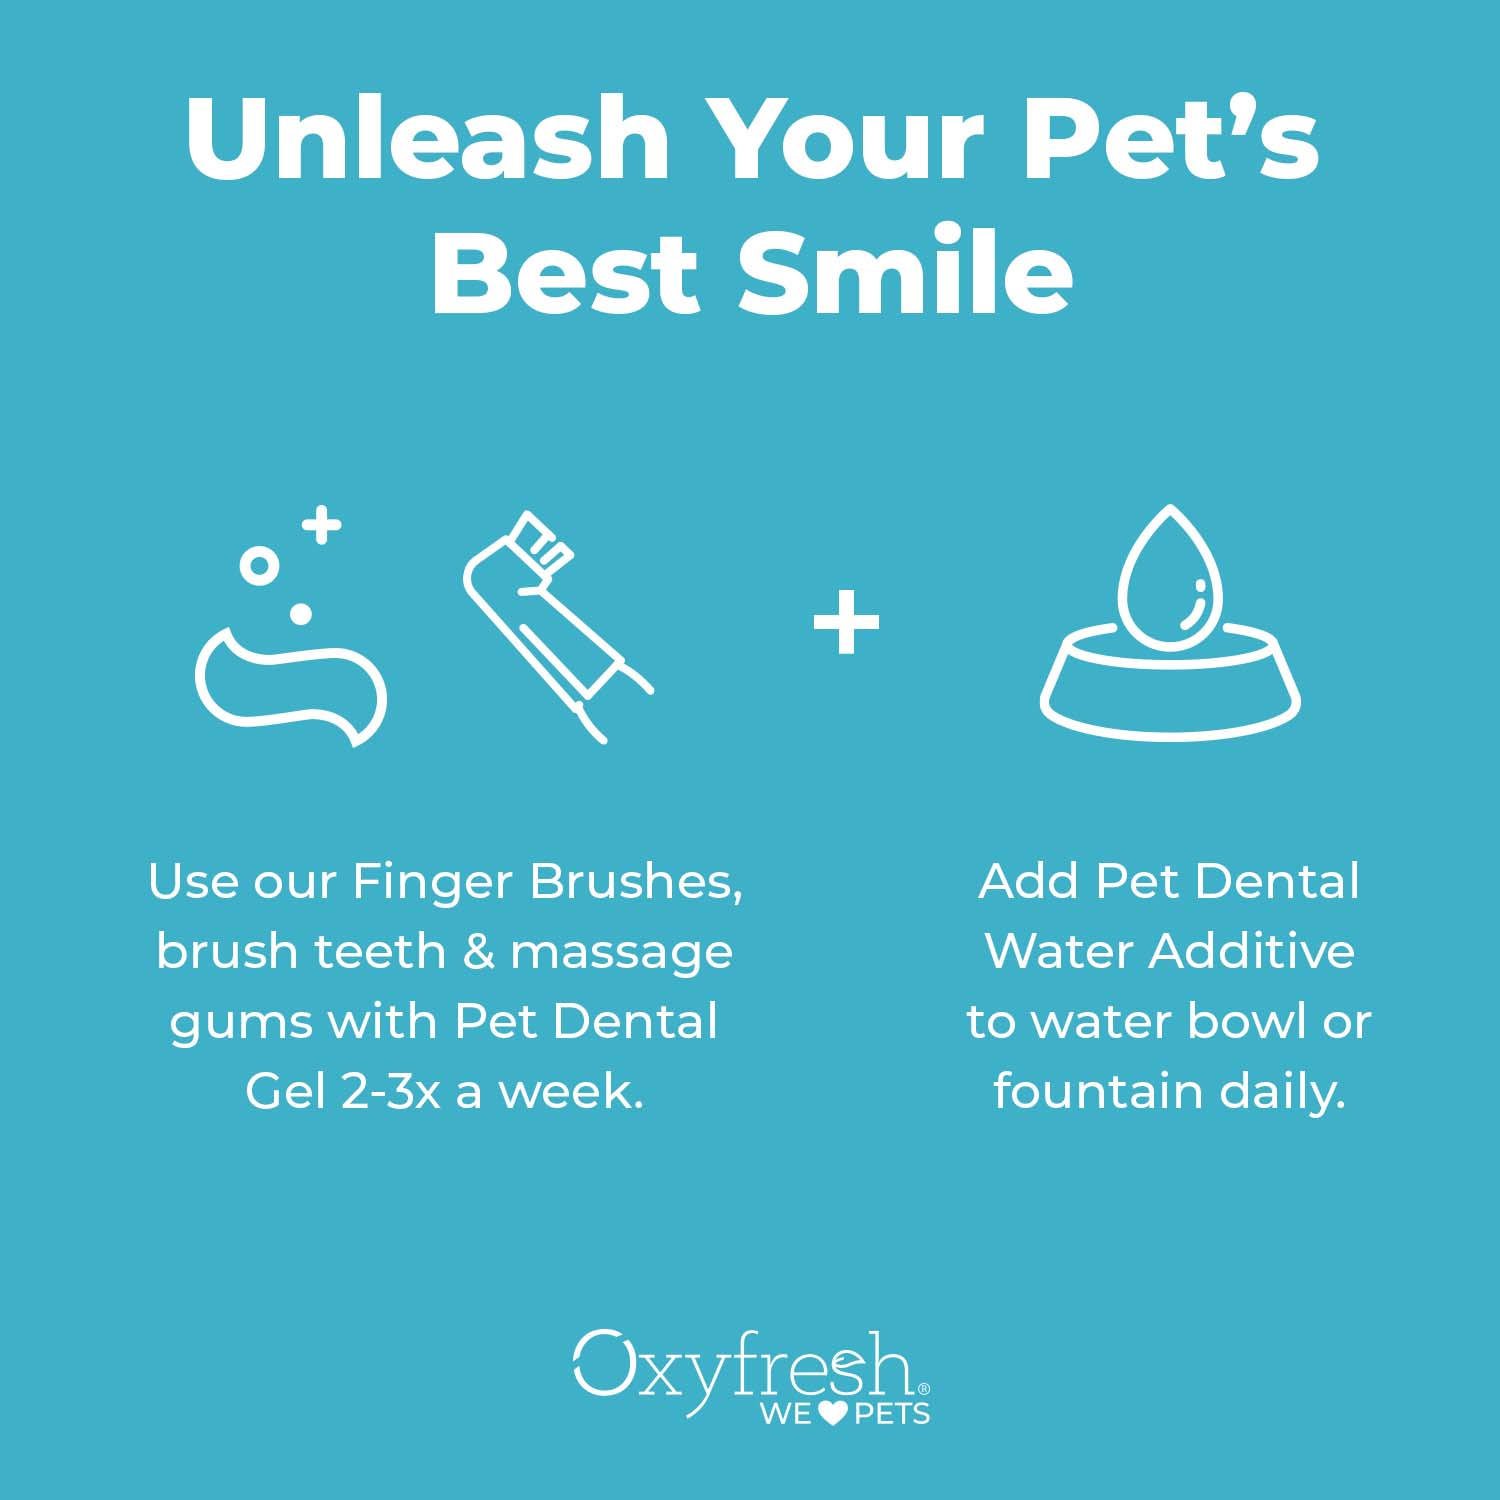 oxyfresh-pet-dental-kit-directions which say unleash your pet's best smile. Use our finger brushes, brush teeth & massage gums with pet dental gel 2-3x a week. then add pet dental water additive to a water bowl or fountain daily